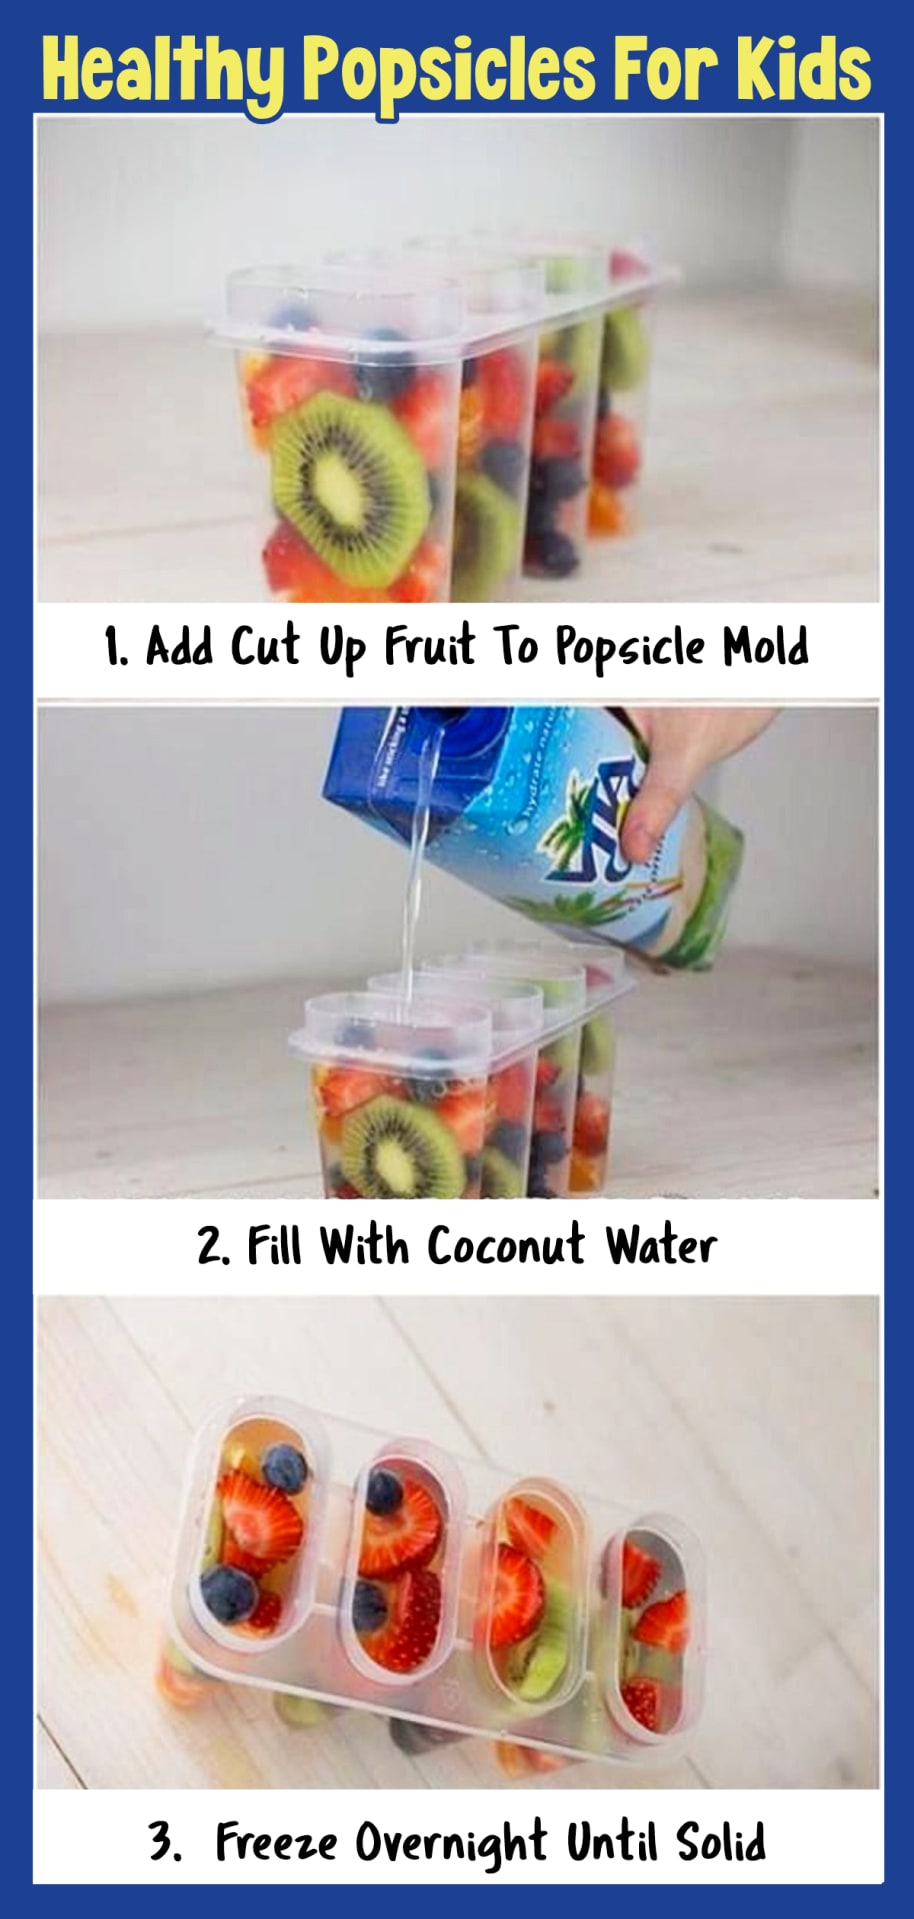 Healthy Popsicle Recipes for Kids - homemade clean eating Healthy Snacks for Kids - quick healthy snacks for kids on the go, for kids to make and healthy snacks for kids lunch boxes at school - easy and fun healthy snacks for toddlers and preschoolers - fun school snacks for kids too! 